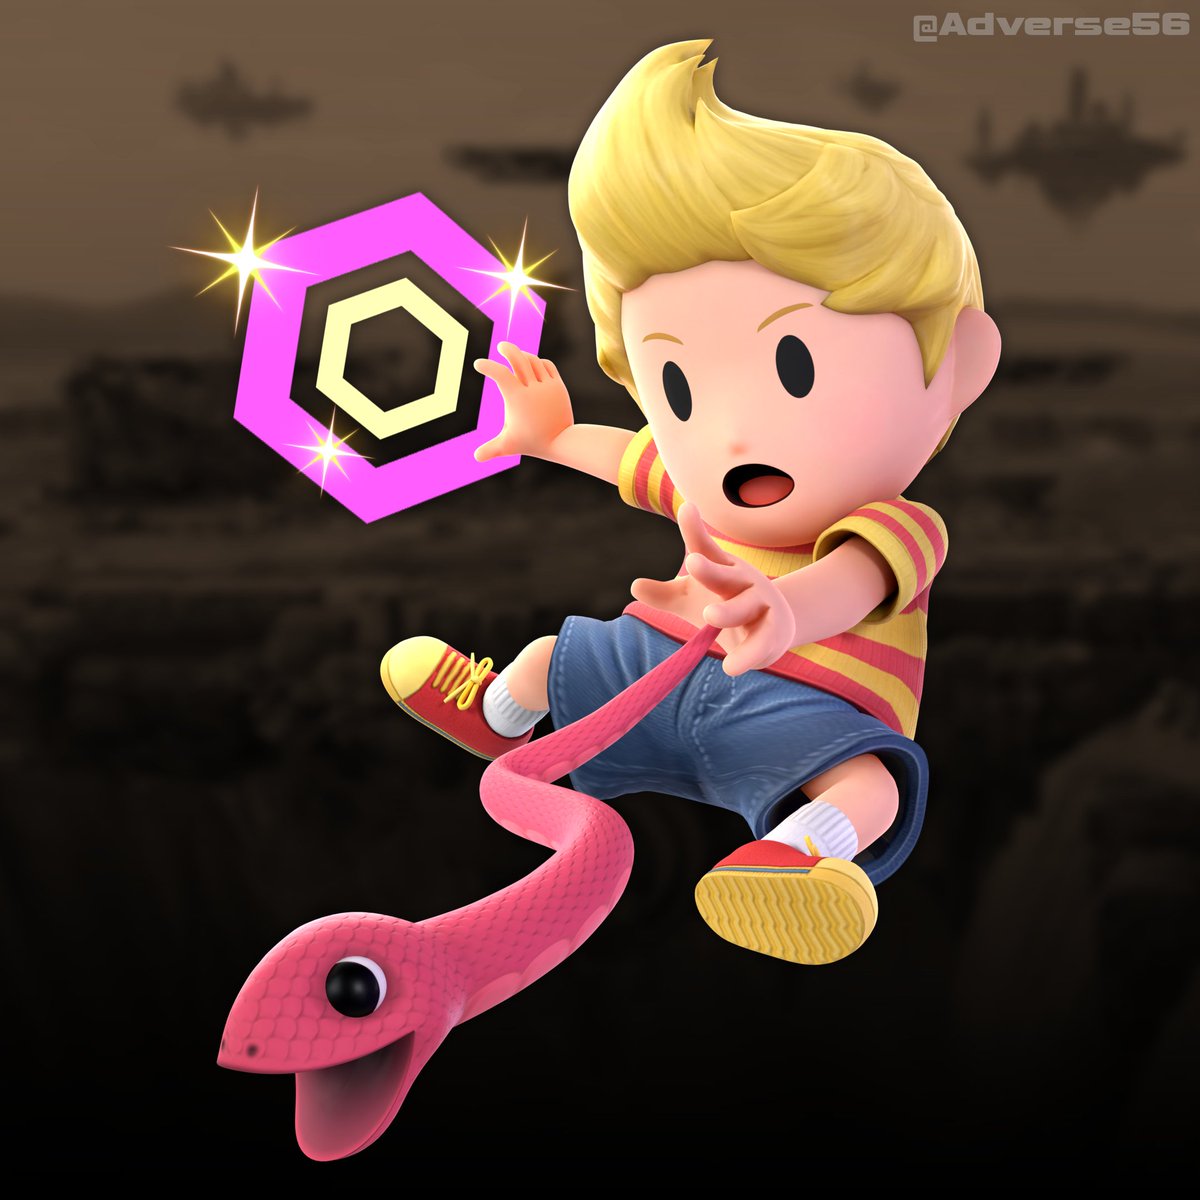 I don't have a funny title for this one, just go play Mother 3 if you can. #MOTHER3 #SmashBros #Blender3D